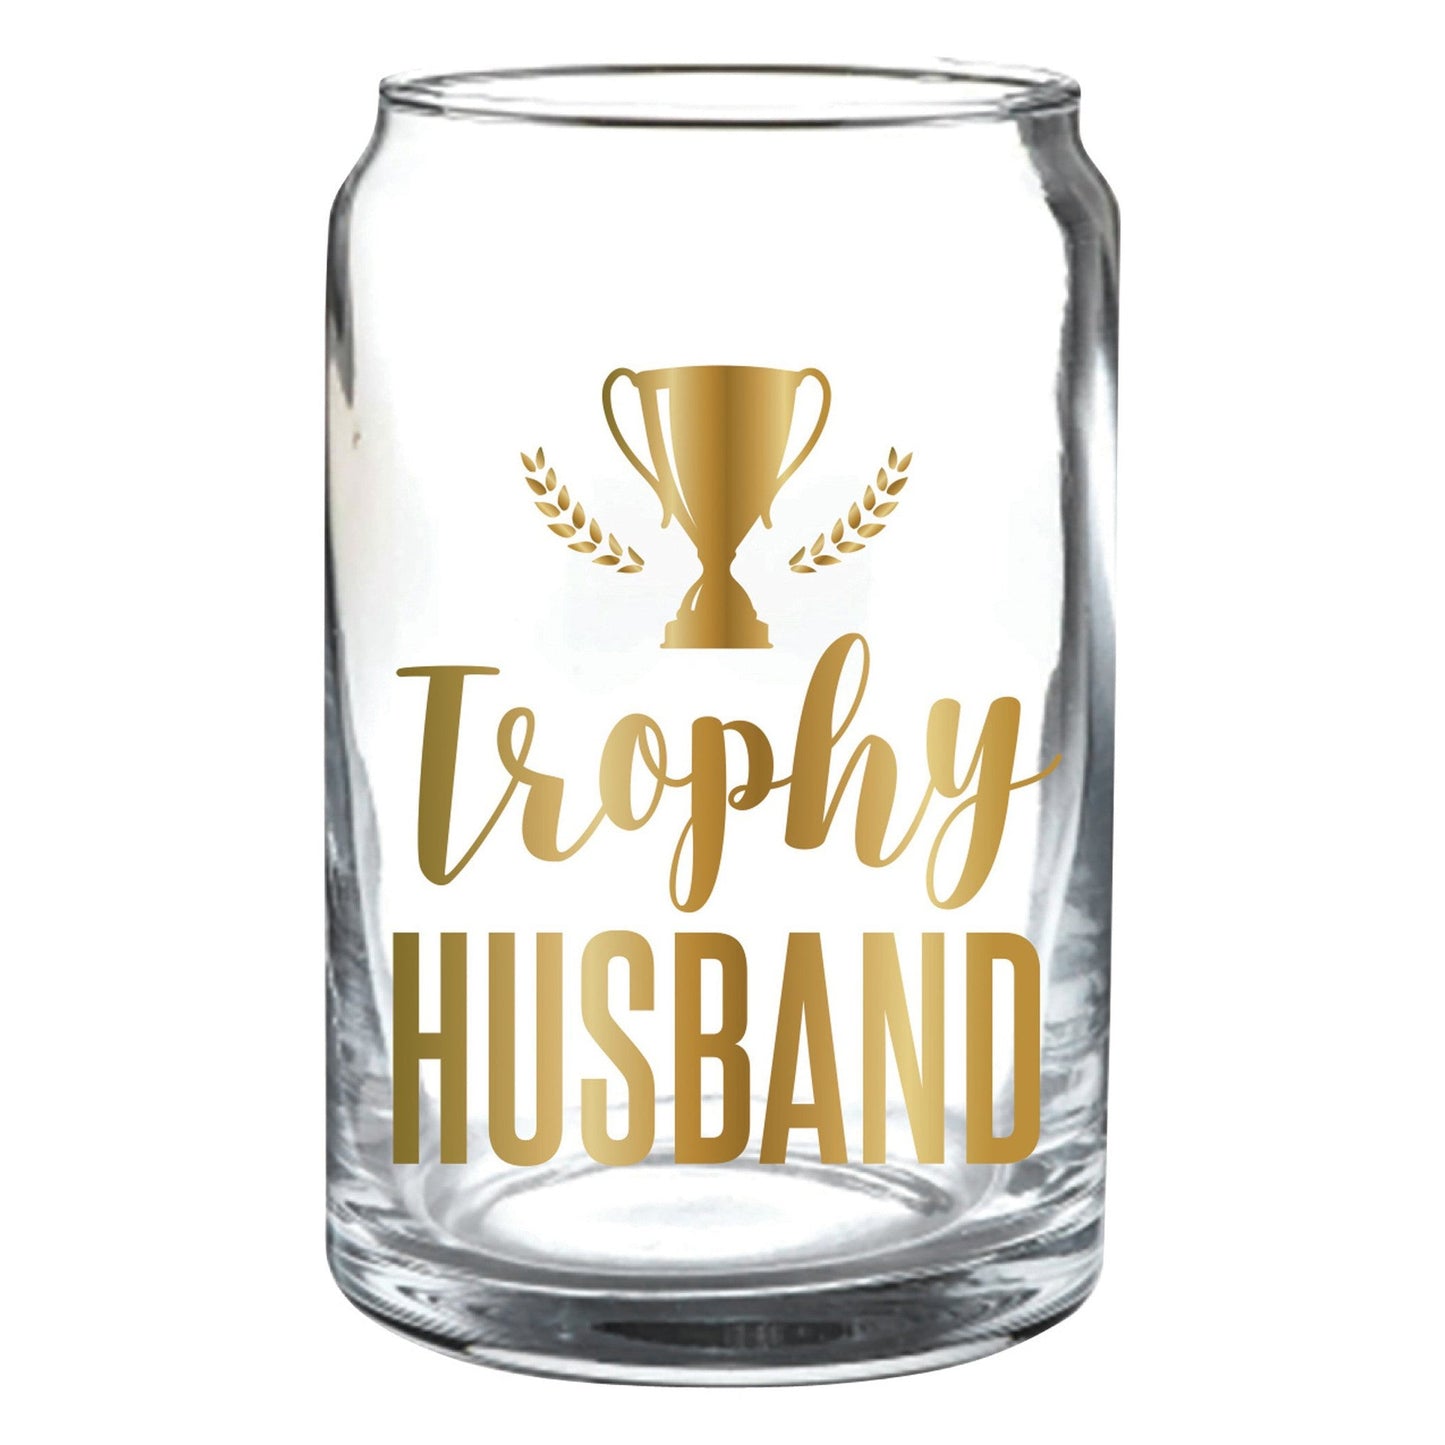 Trophy Husband Beer Glass with Gold Lettering | 15 oz.